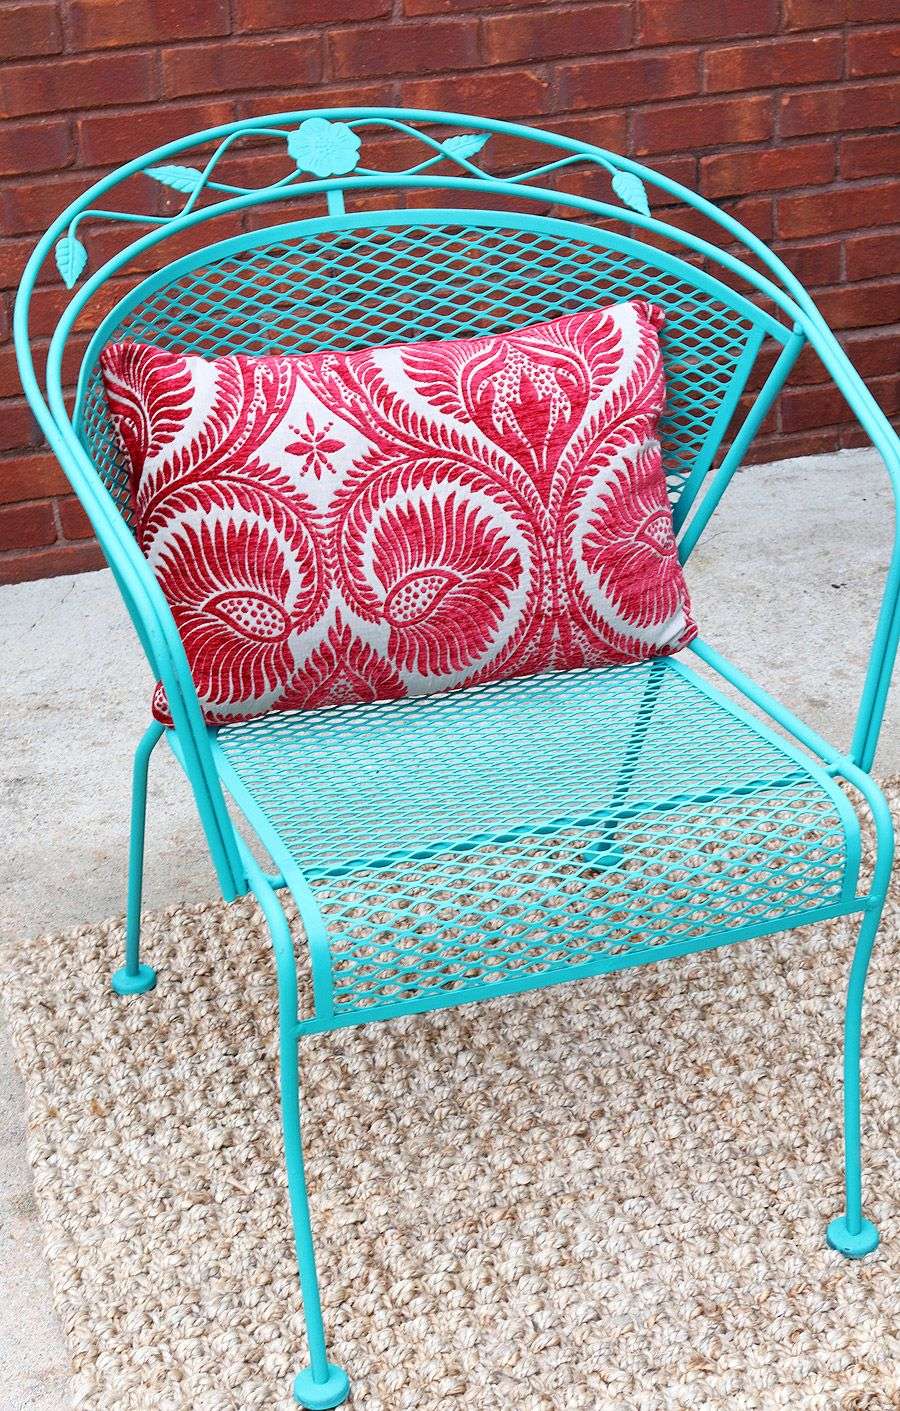 How To Paint Patio Furniture with Chalk Paint®